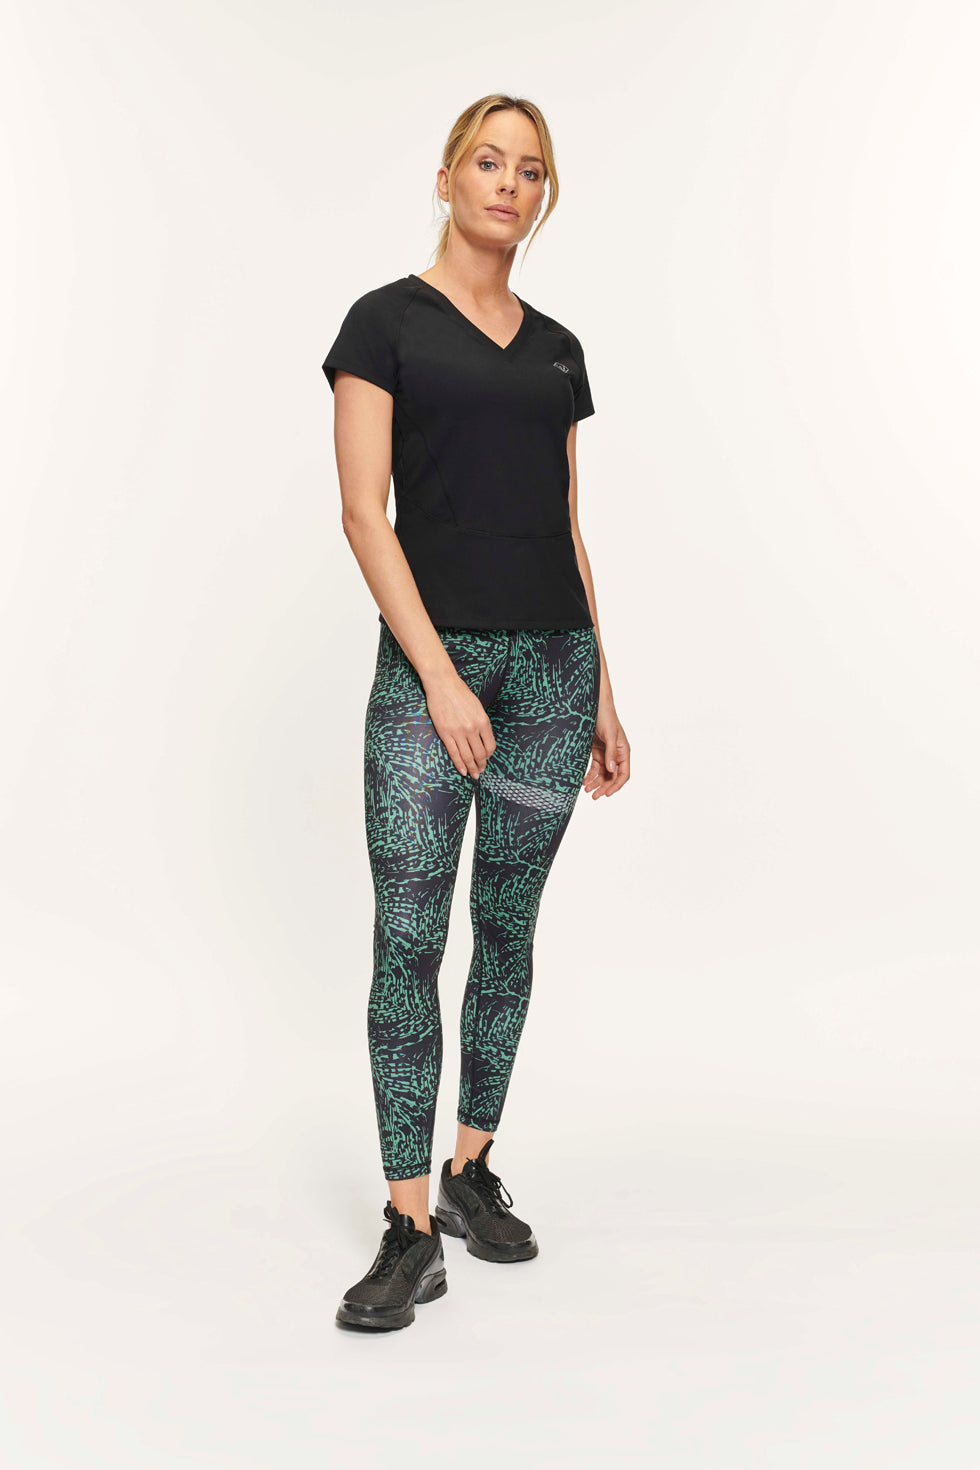 Active Panther - Green Leopard - Lola Leaves high waist Legging